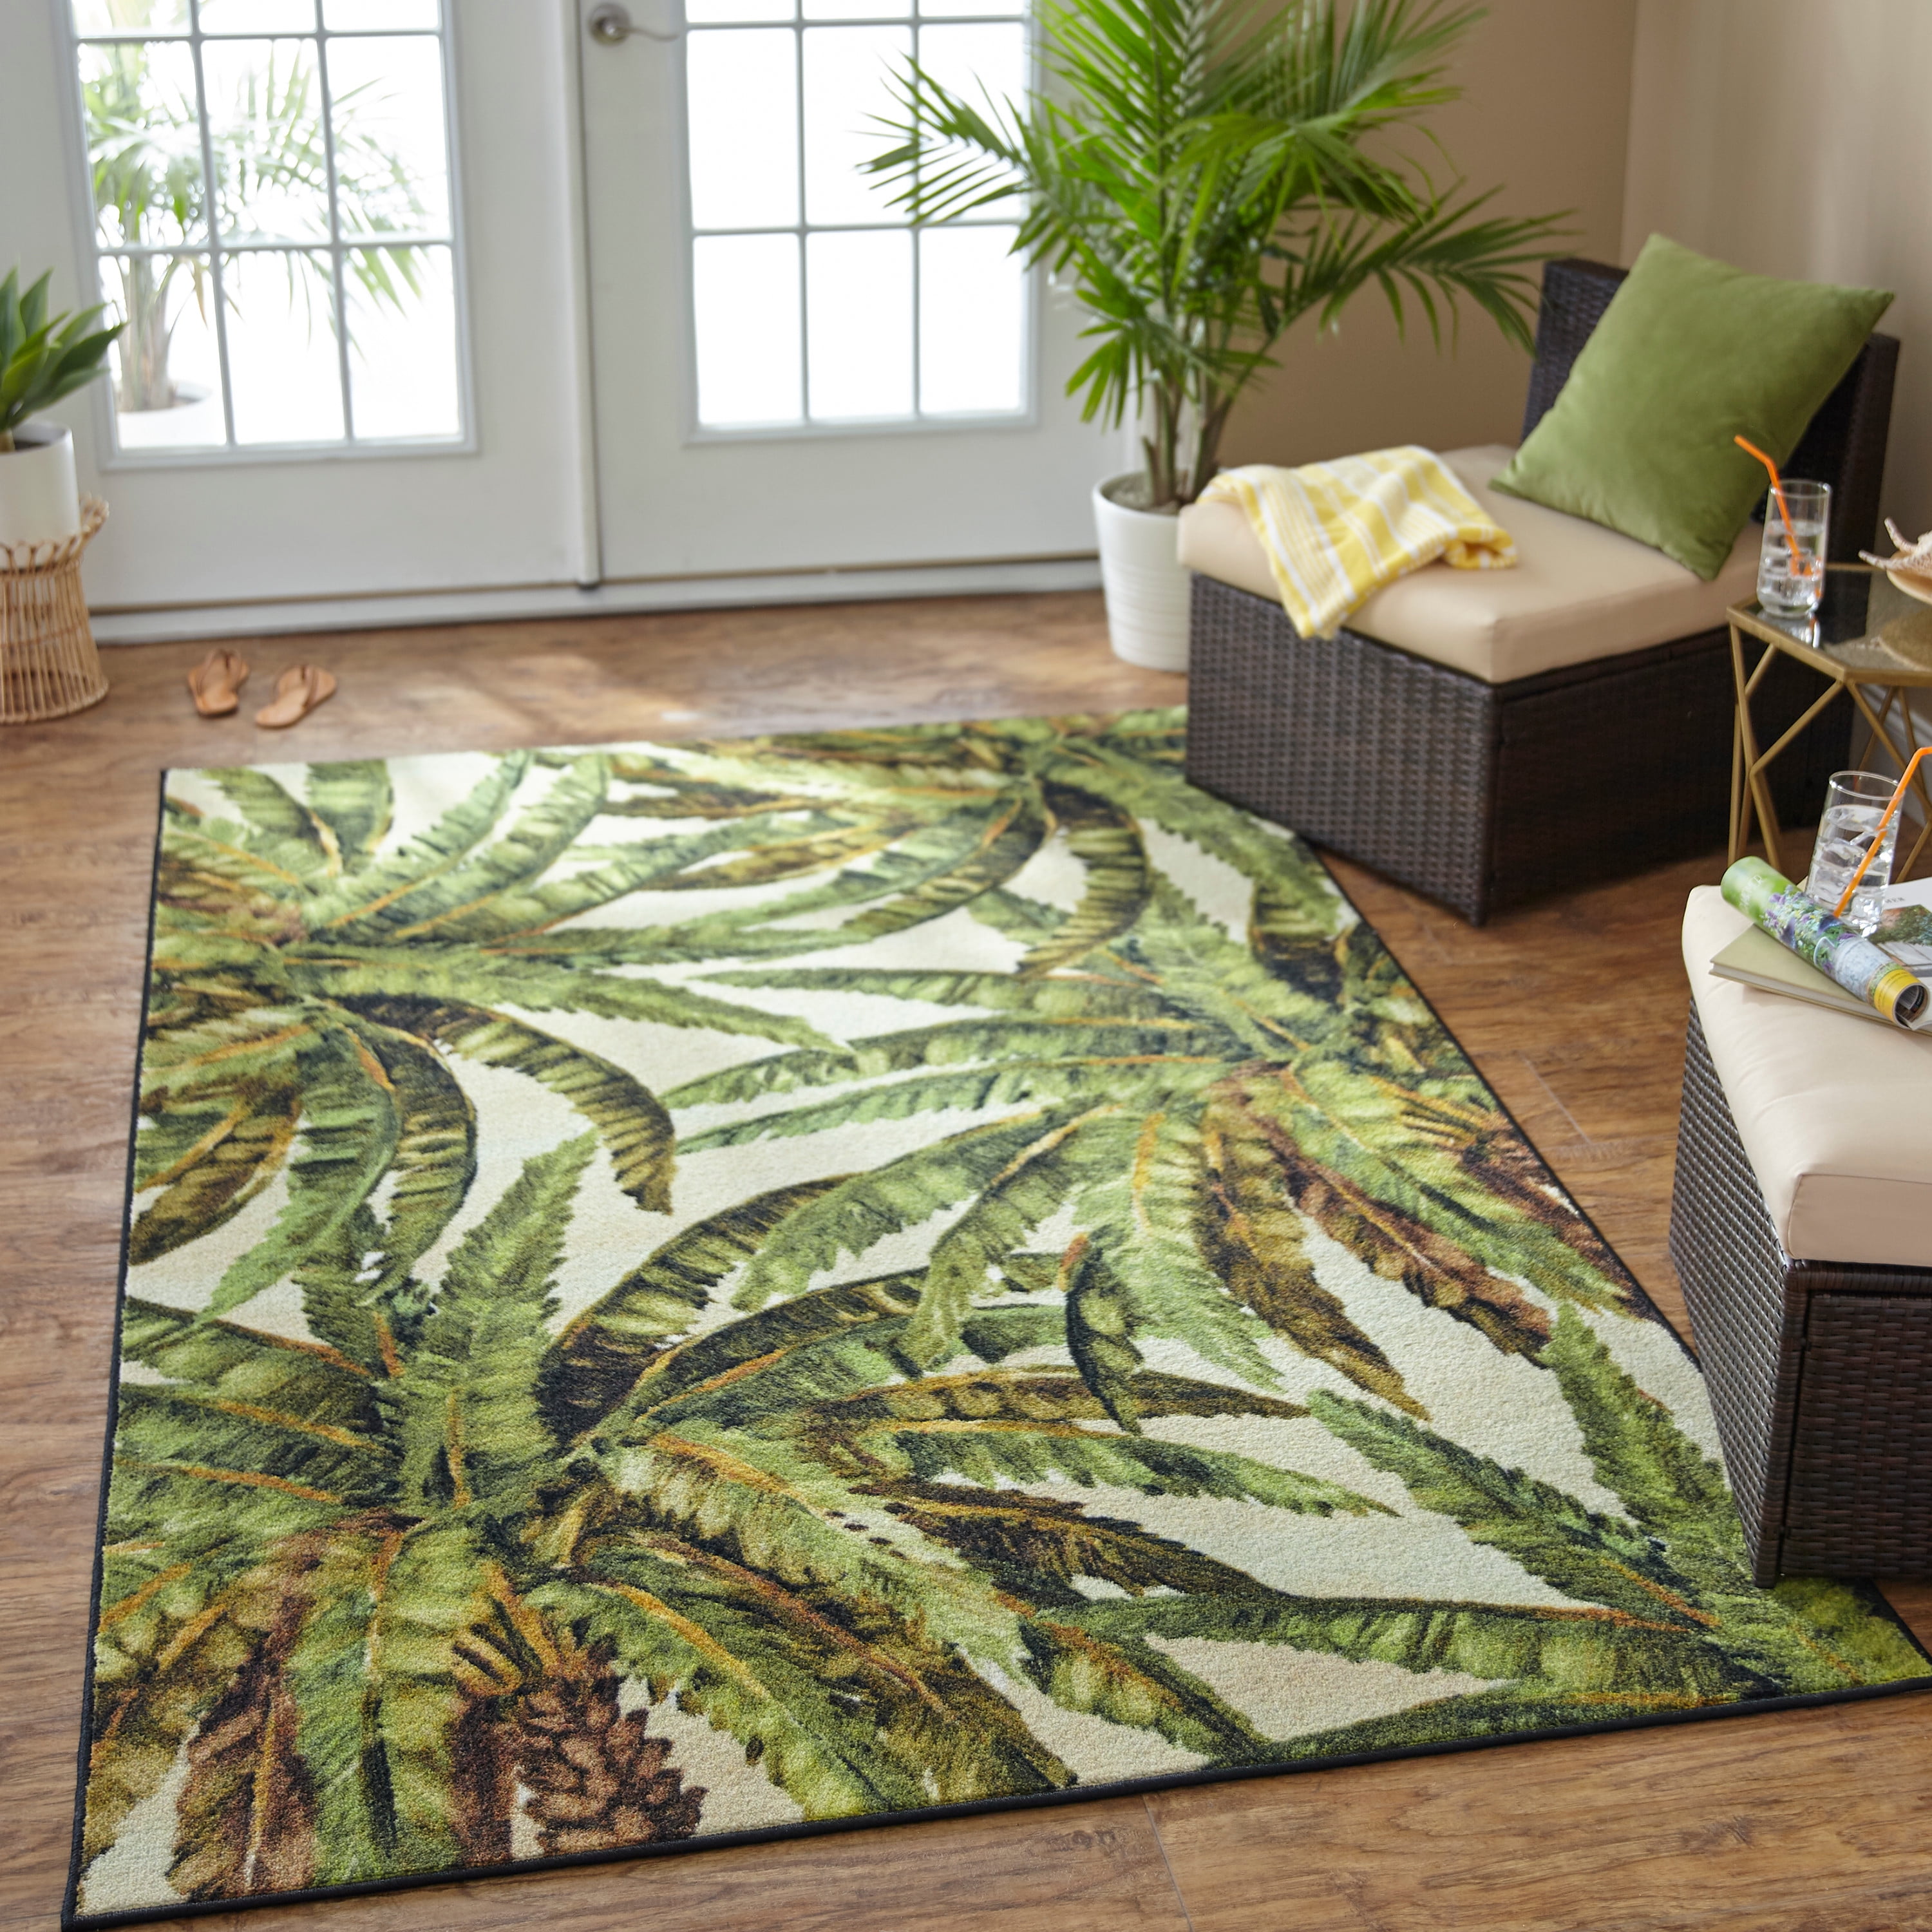 Striped Hello Summer Tropical Palm Leafs Floor Mat Bedroom Living Room Area Rugs 